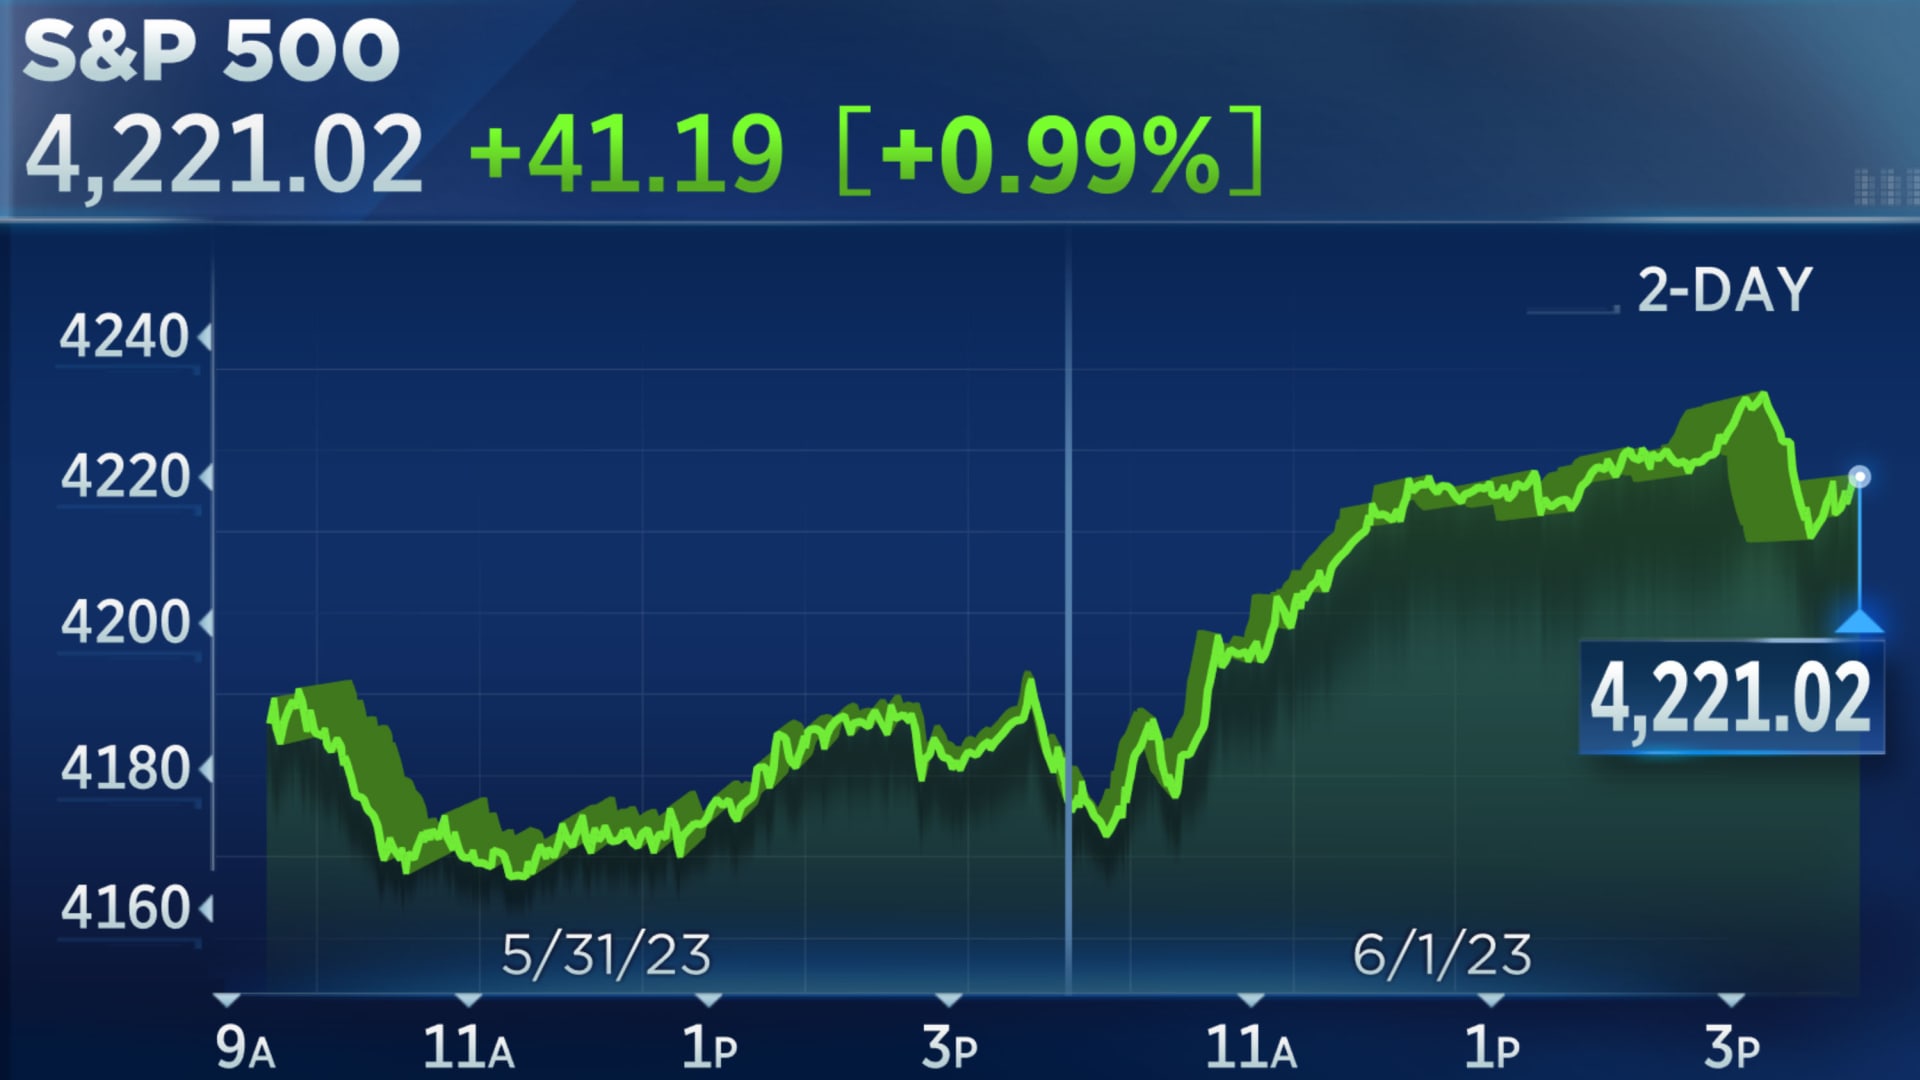 Nasdaq and S&P 500 close at highest levels since August on optimism over debt ceiling bill: Live updates